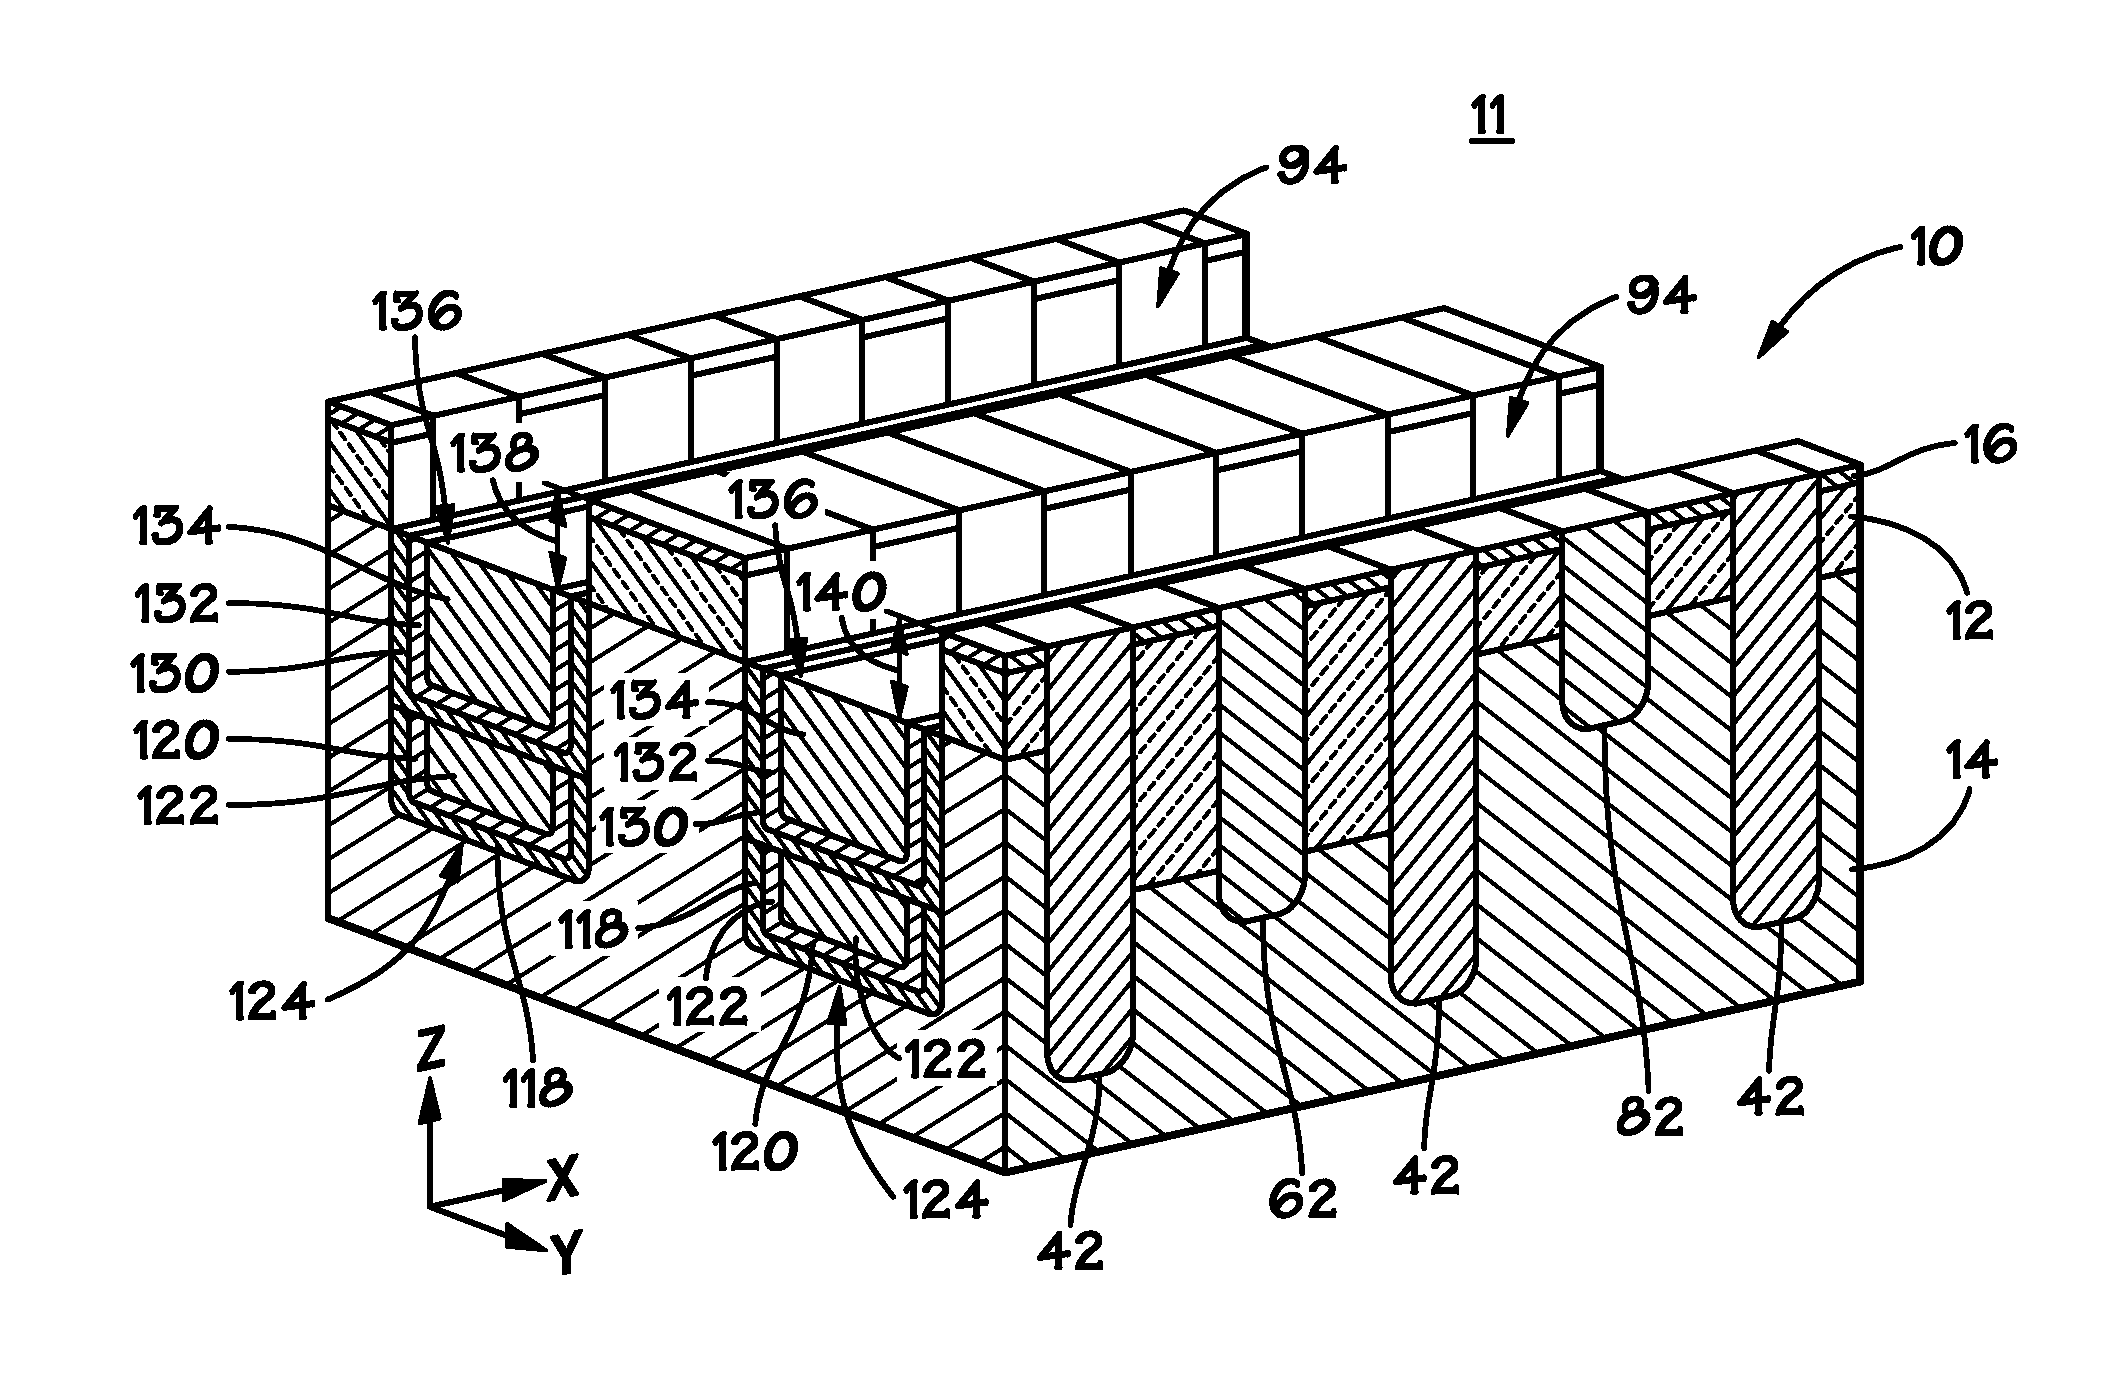 Vertically stacked fin transistors and methods of fabricating and operating the same